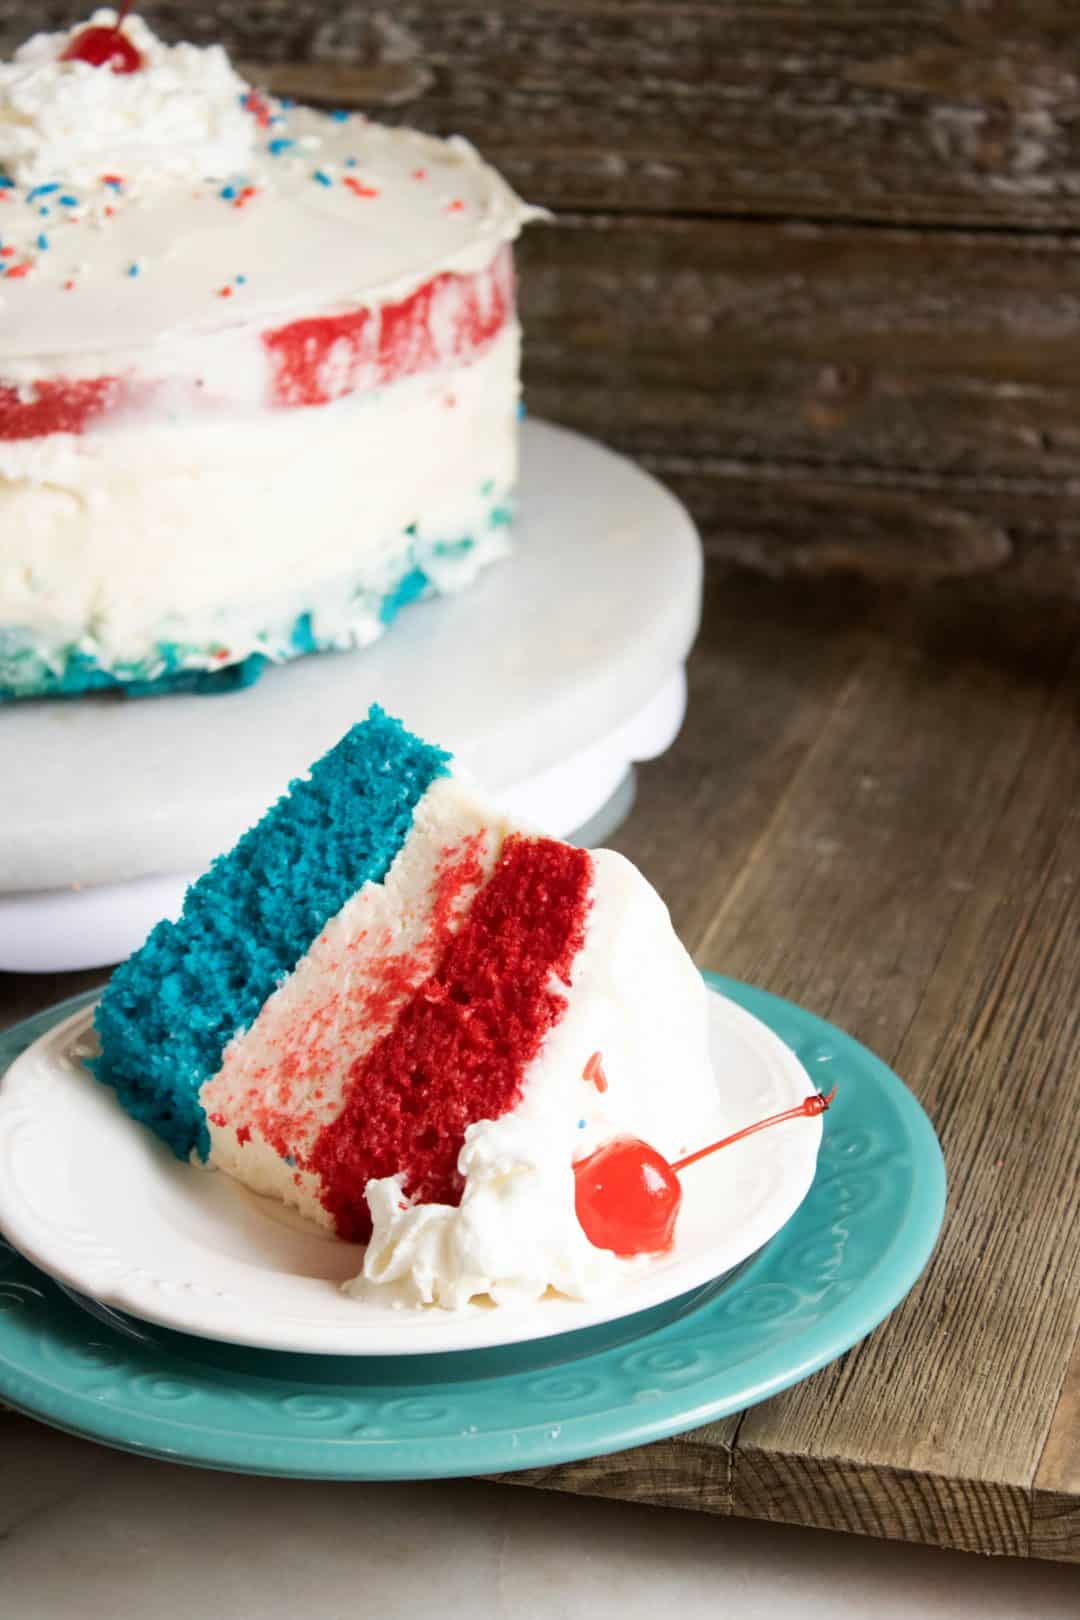 Red White and Blue Cake with Cheesecake Layer - Sweet Pea's Kitchen